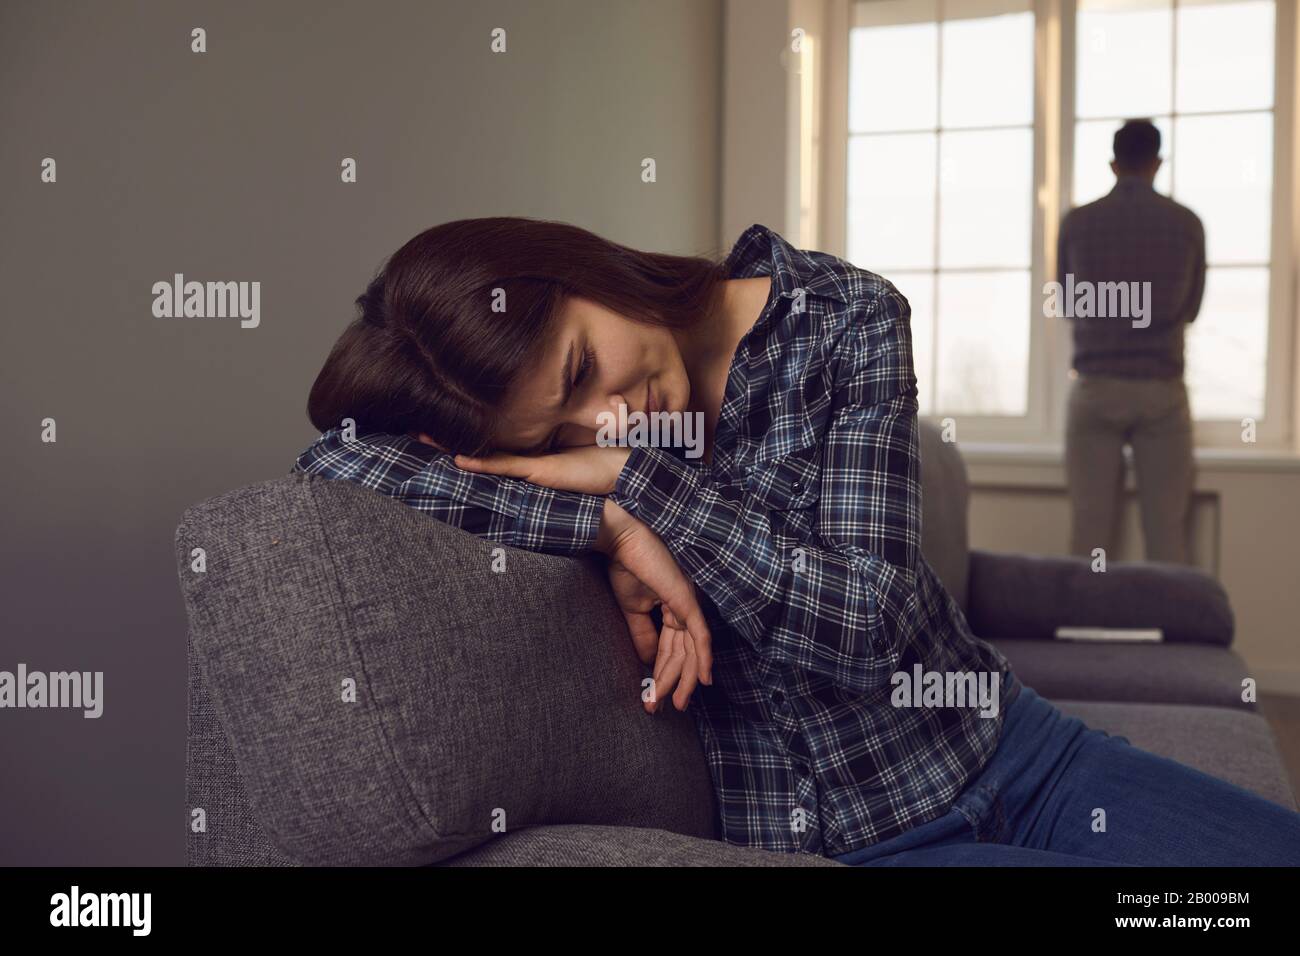 A young couple quarreling while sitting on a sofa in a room. Stock Photo